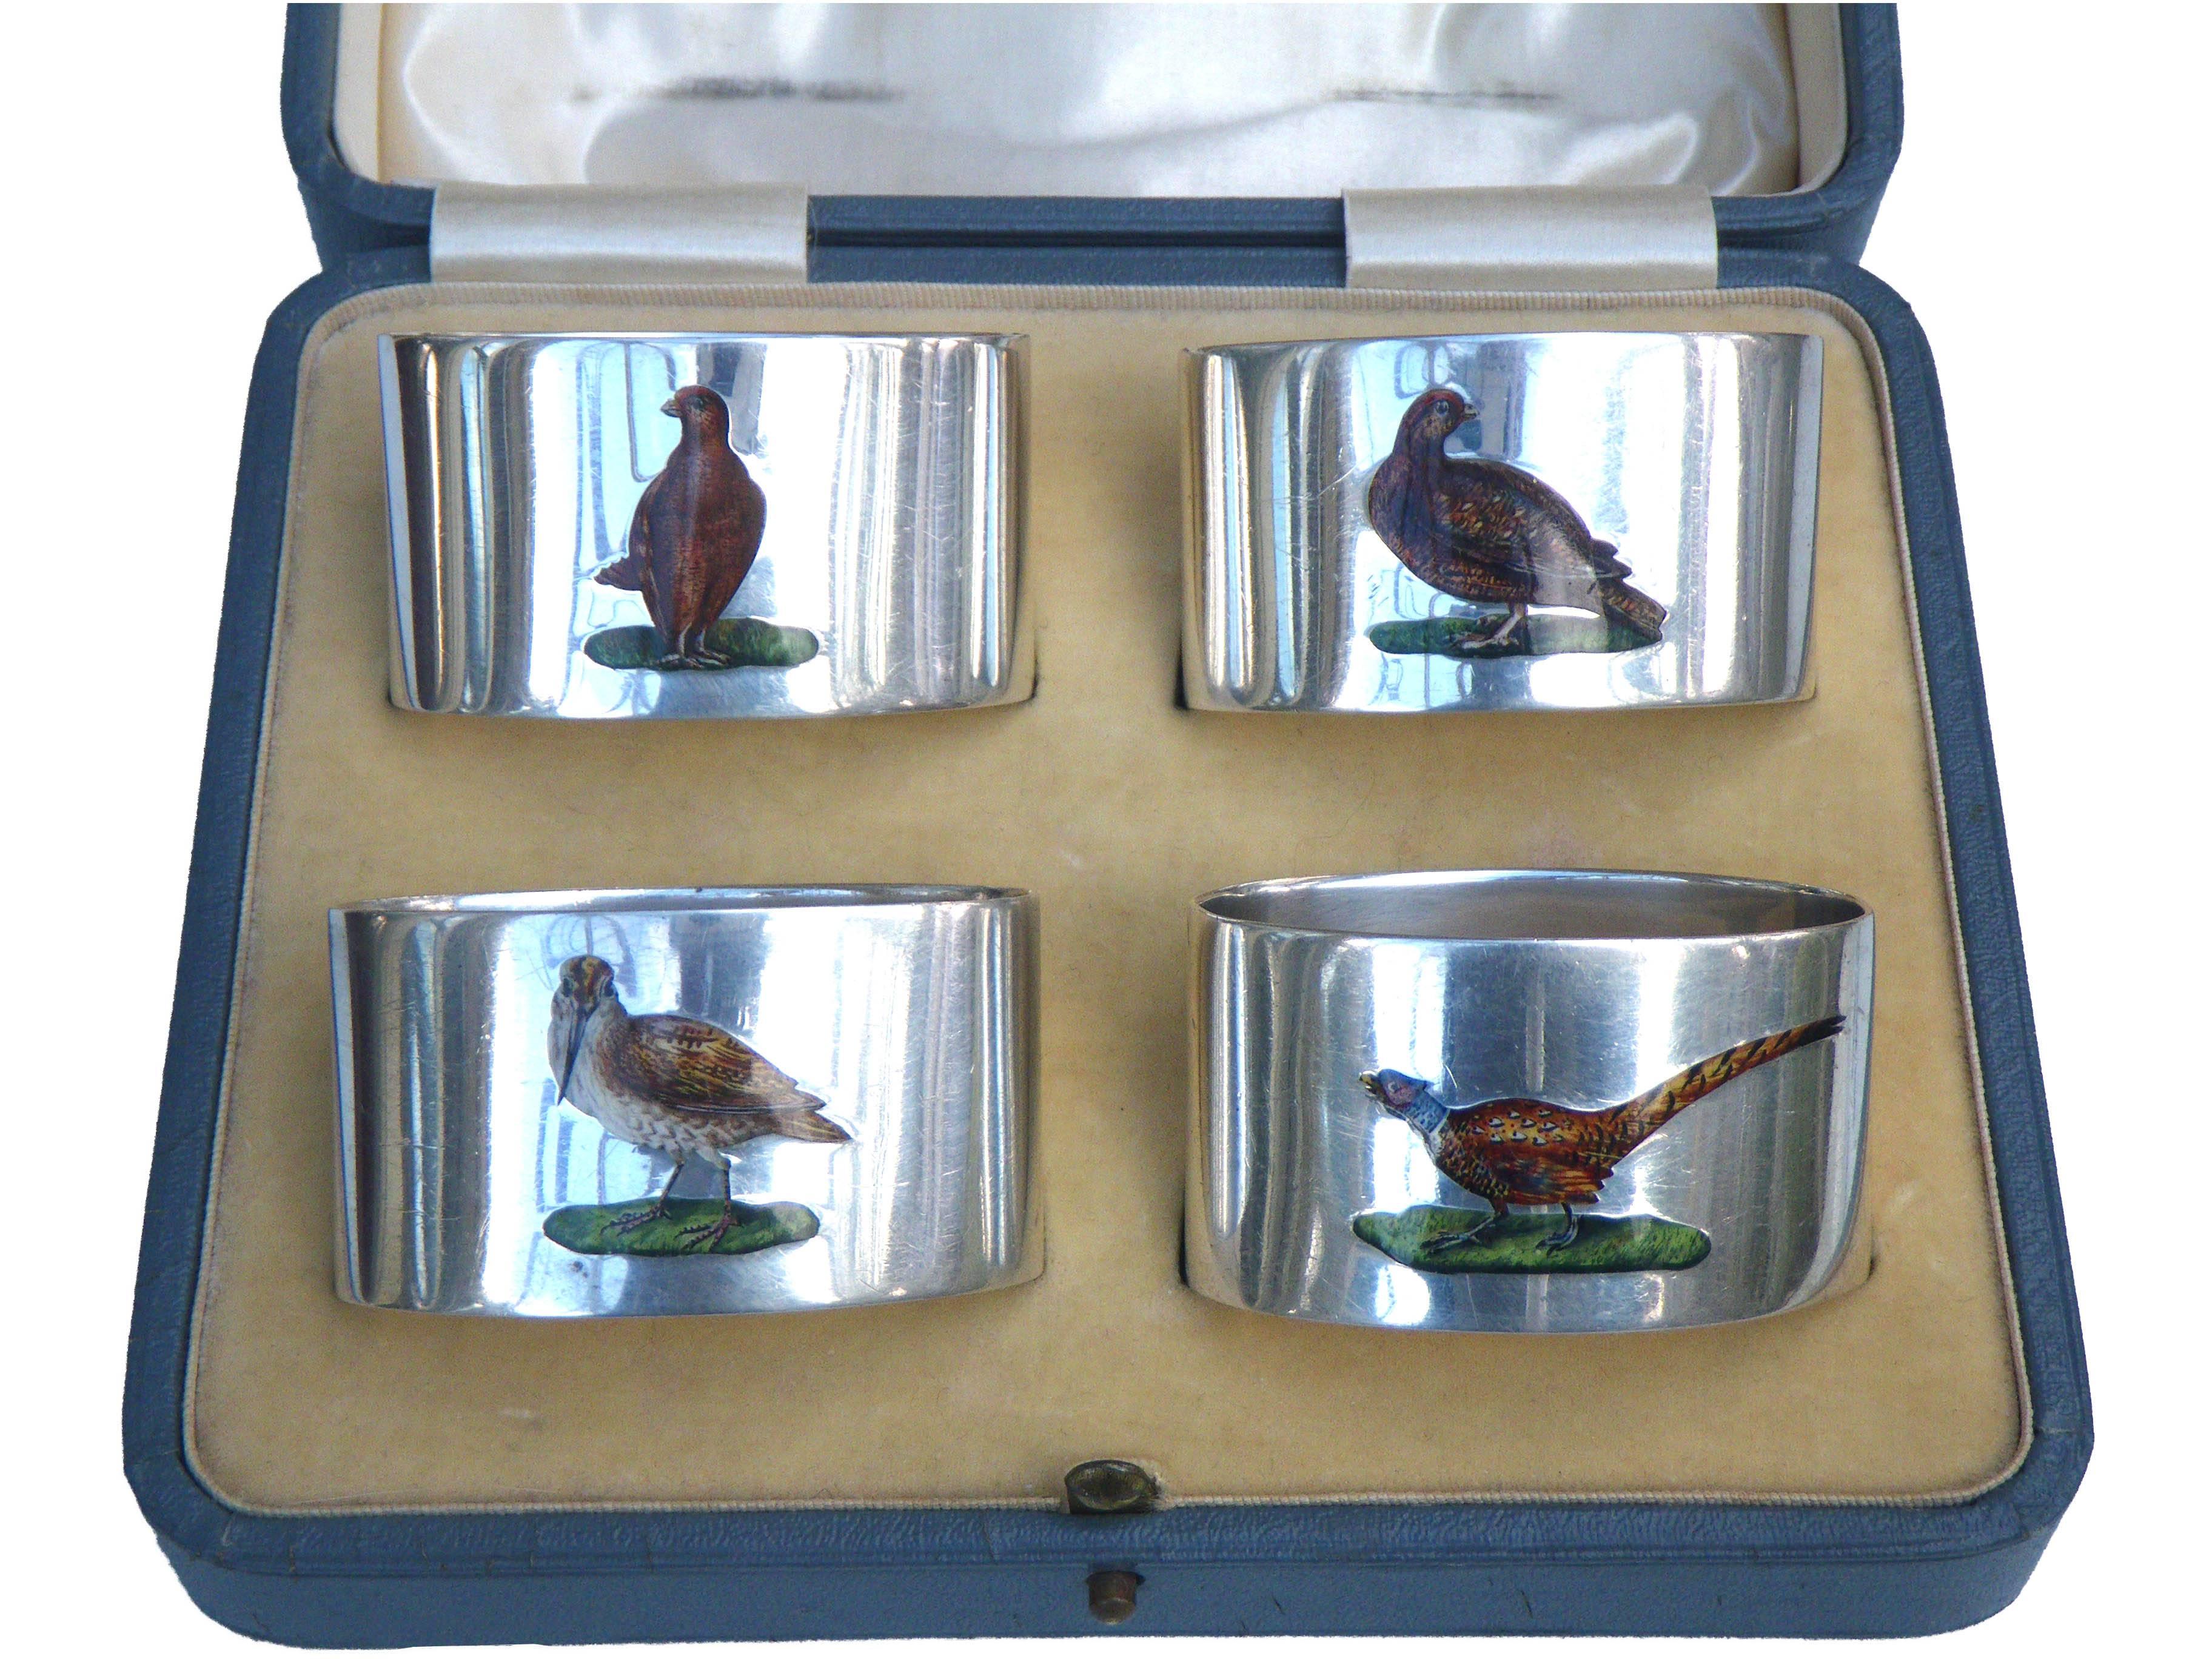 A very rare, superb set of hand enamelled sterling silver heavy quality napkin rings depicting four different game birds, namely
Snipe, Pheasant, Partridge, Grouse

Made by Stokes & Ireland Ltd (William Henry Stokes & Arthur George Ireland) in